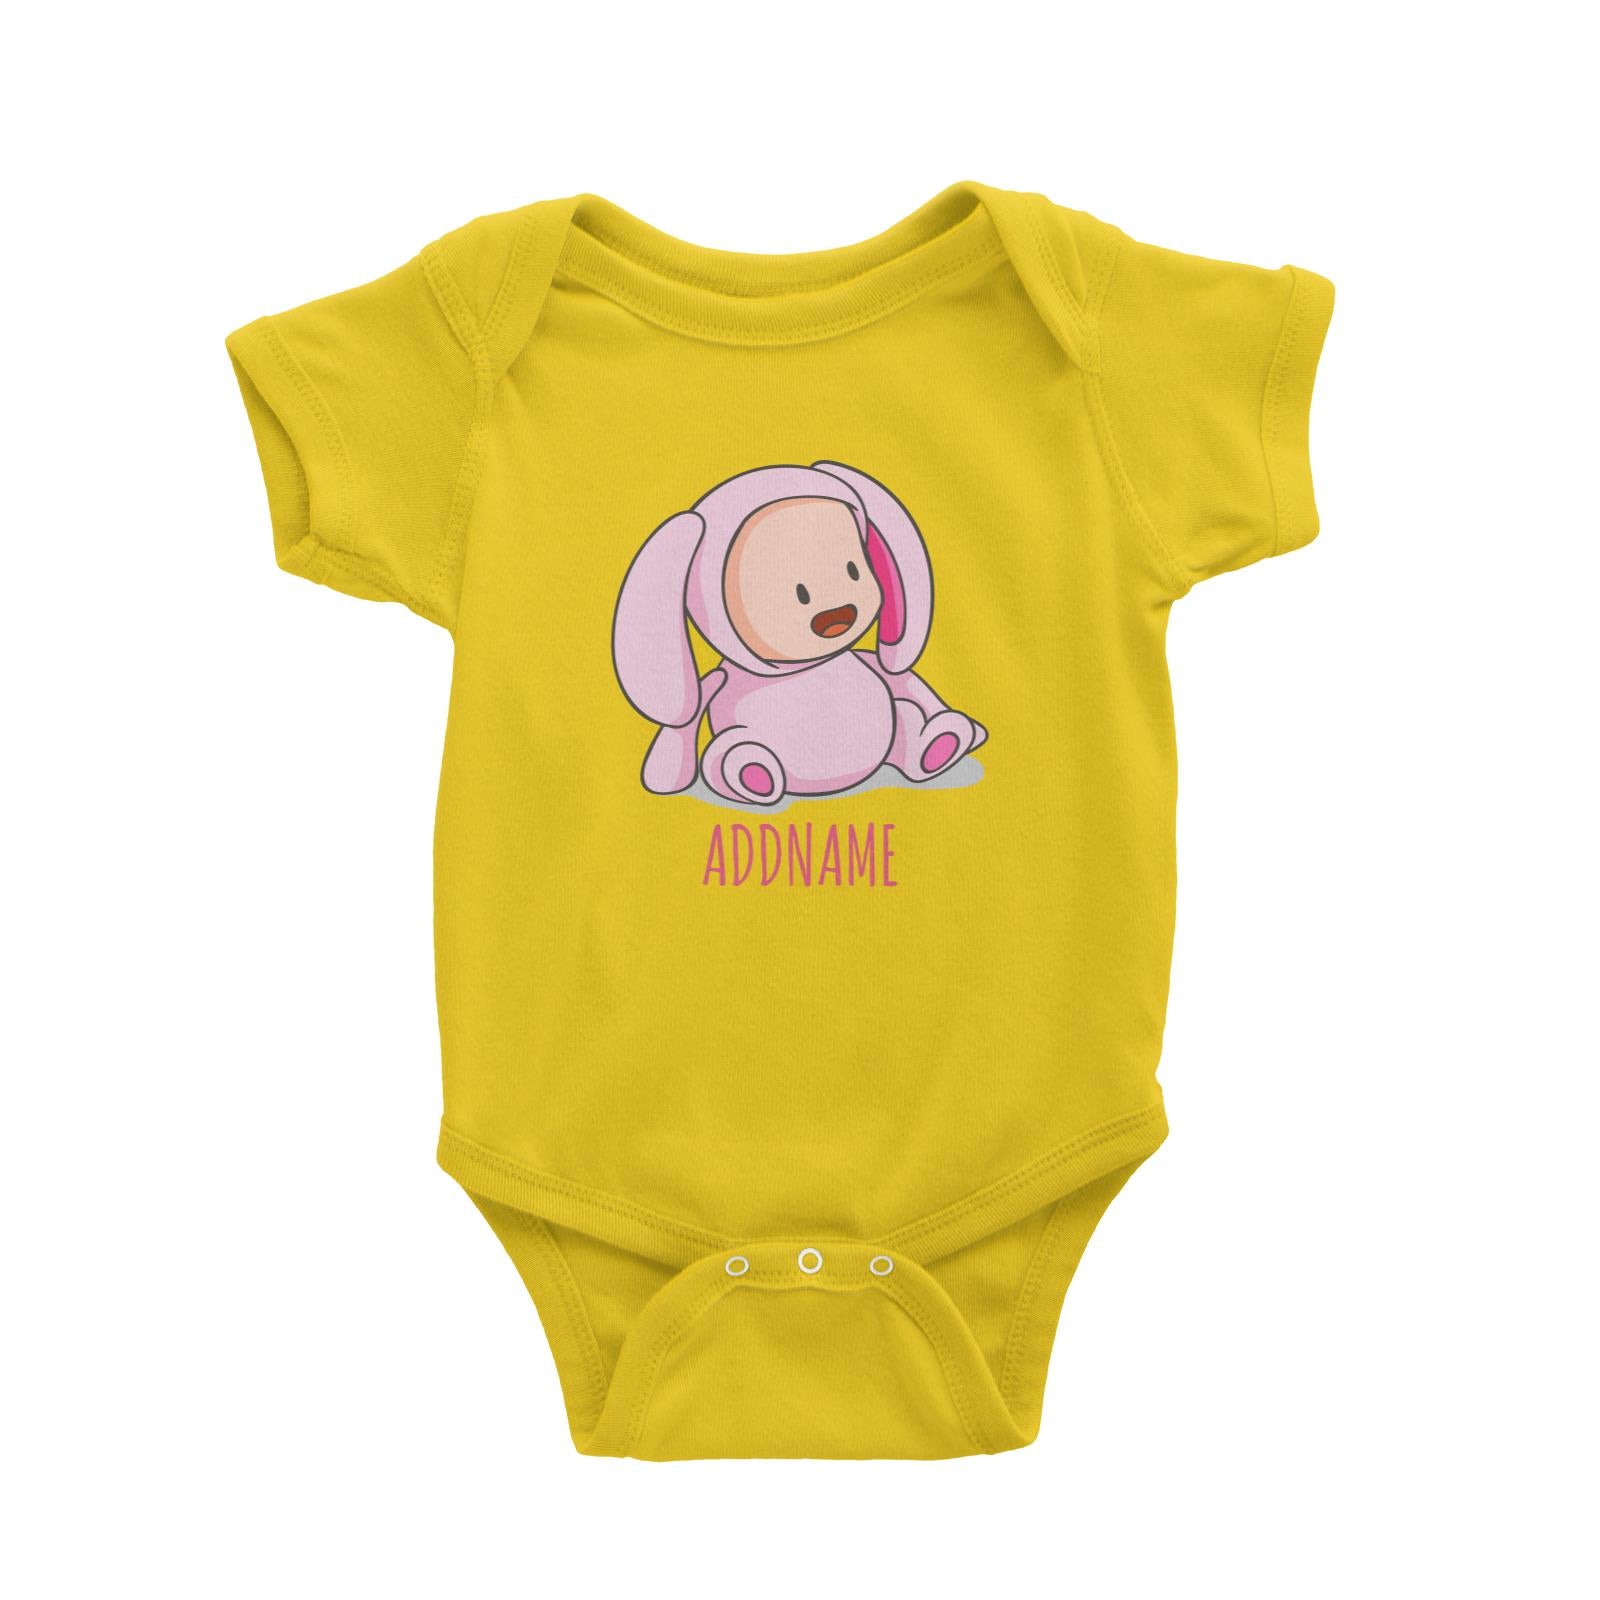 Cute Baby in Pink Rabbit Suit Addname Baby Romper